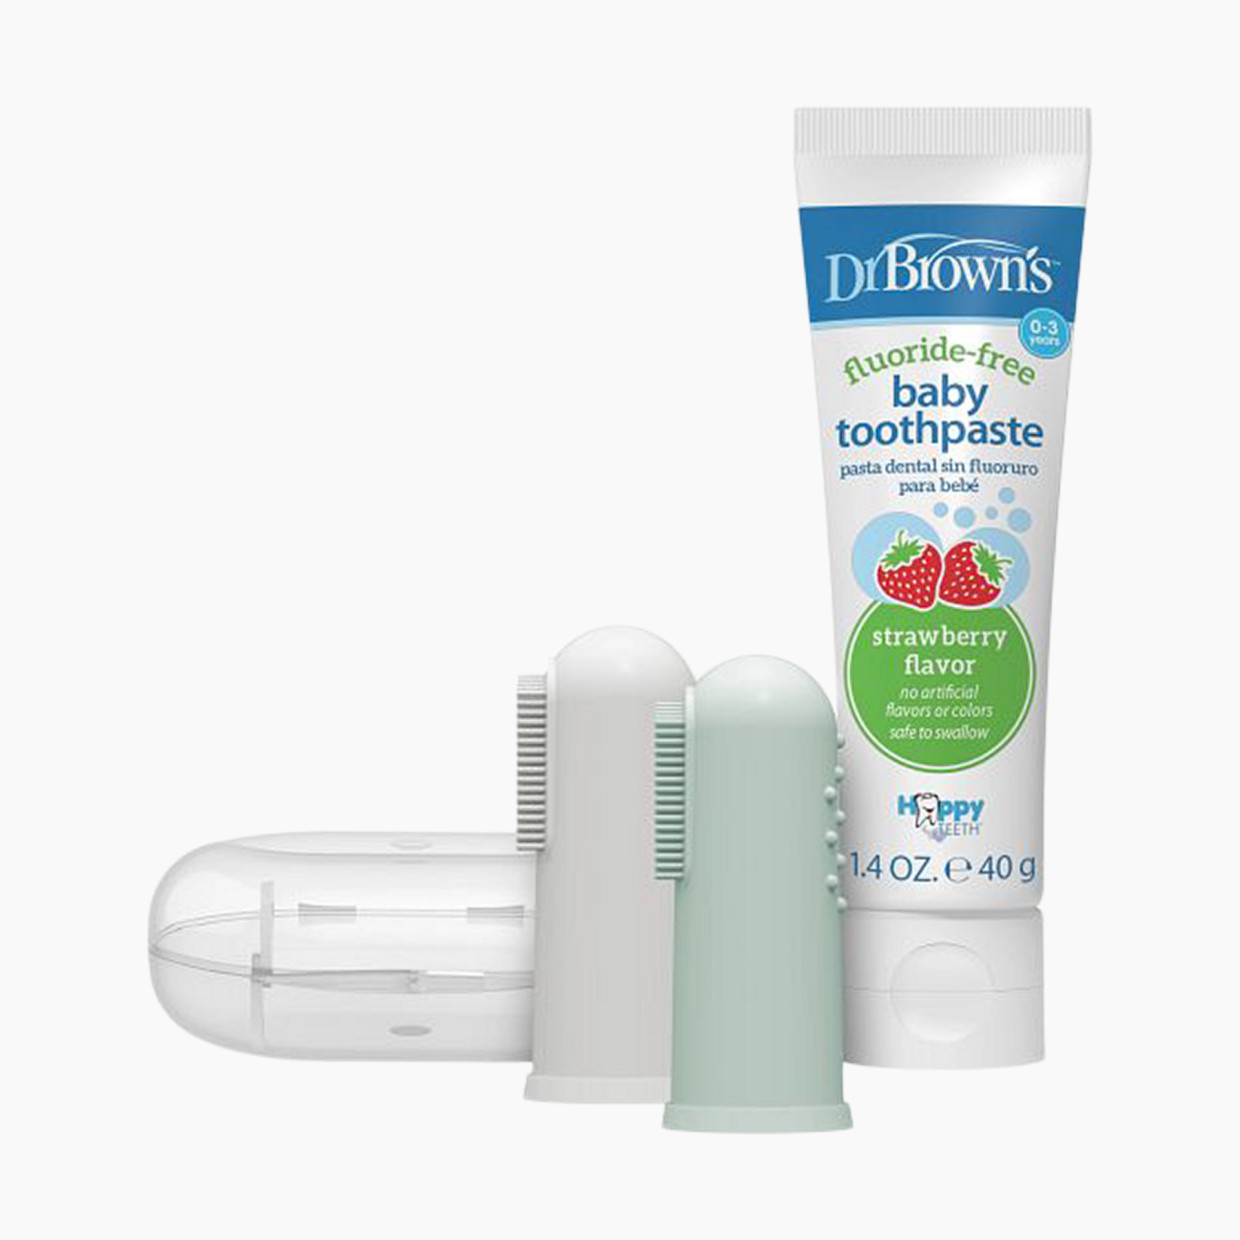 Dr. Brown's Silicone Finger Toothbrush with Case, 2-Pack - Gray/Green, Strawberry Toothpaste.